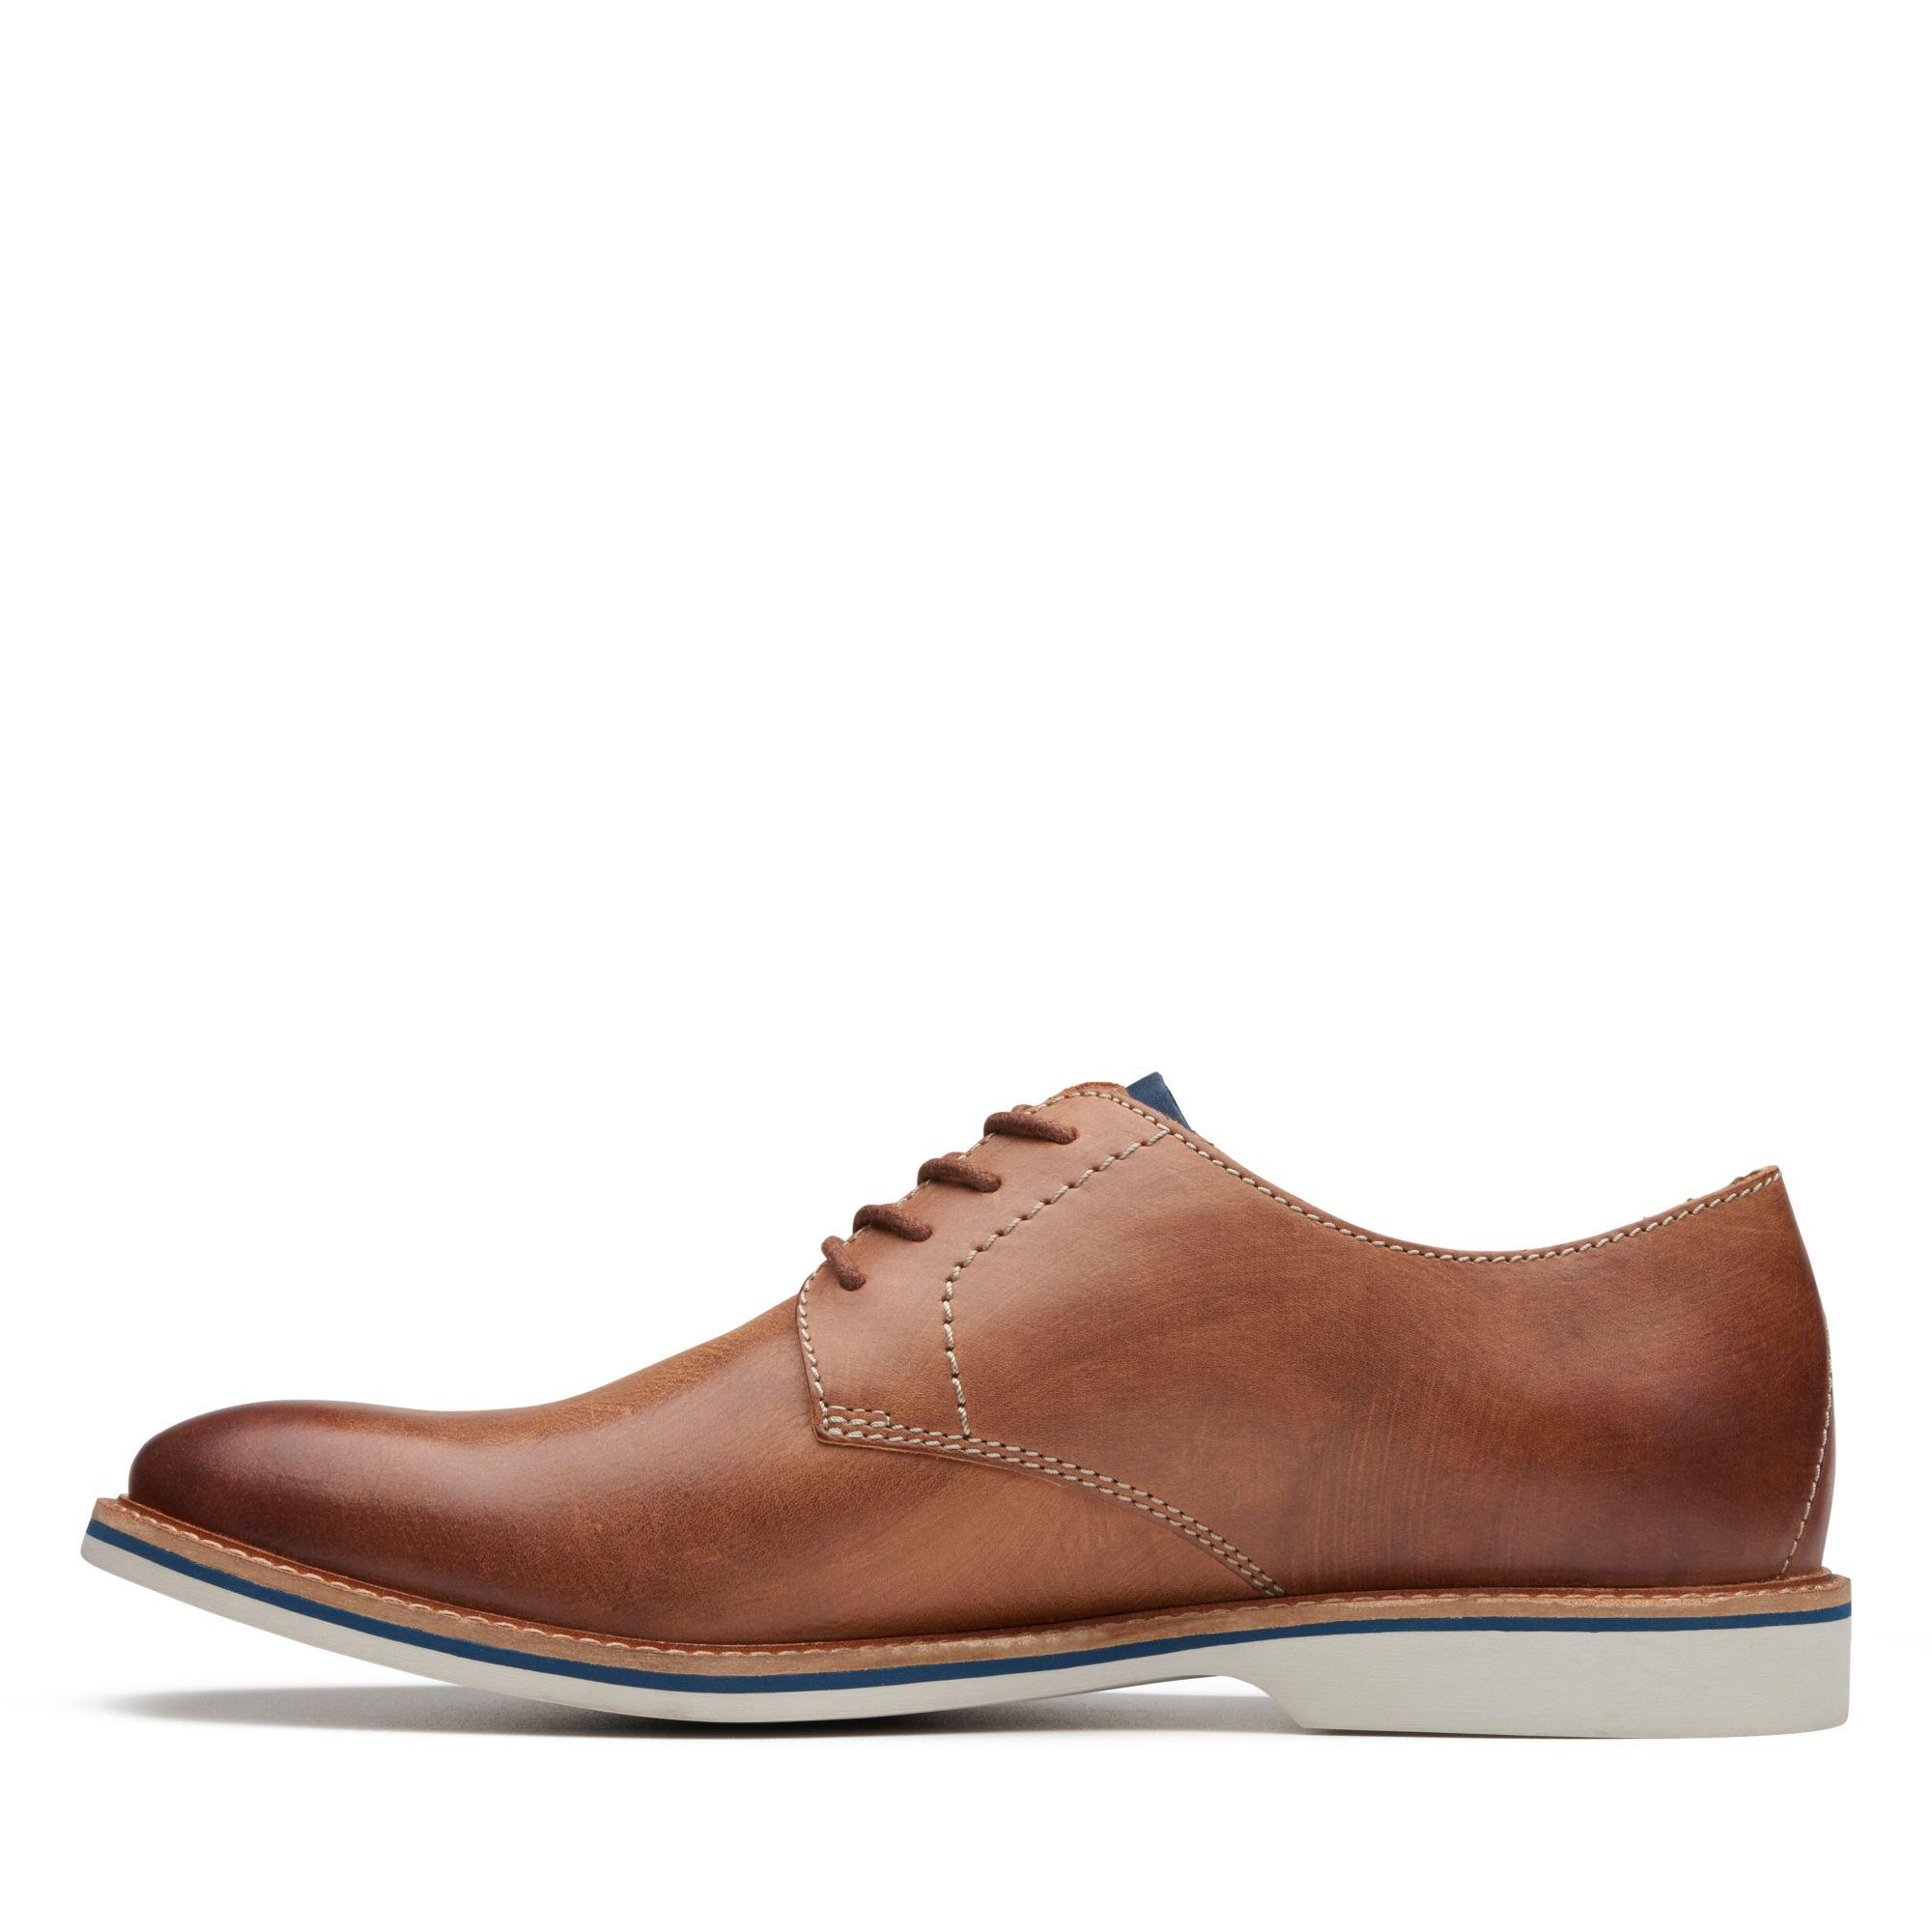 Clarks Atticus Lace in Tan Leather 